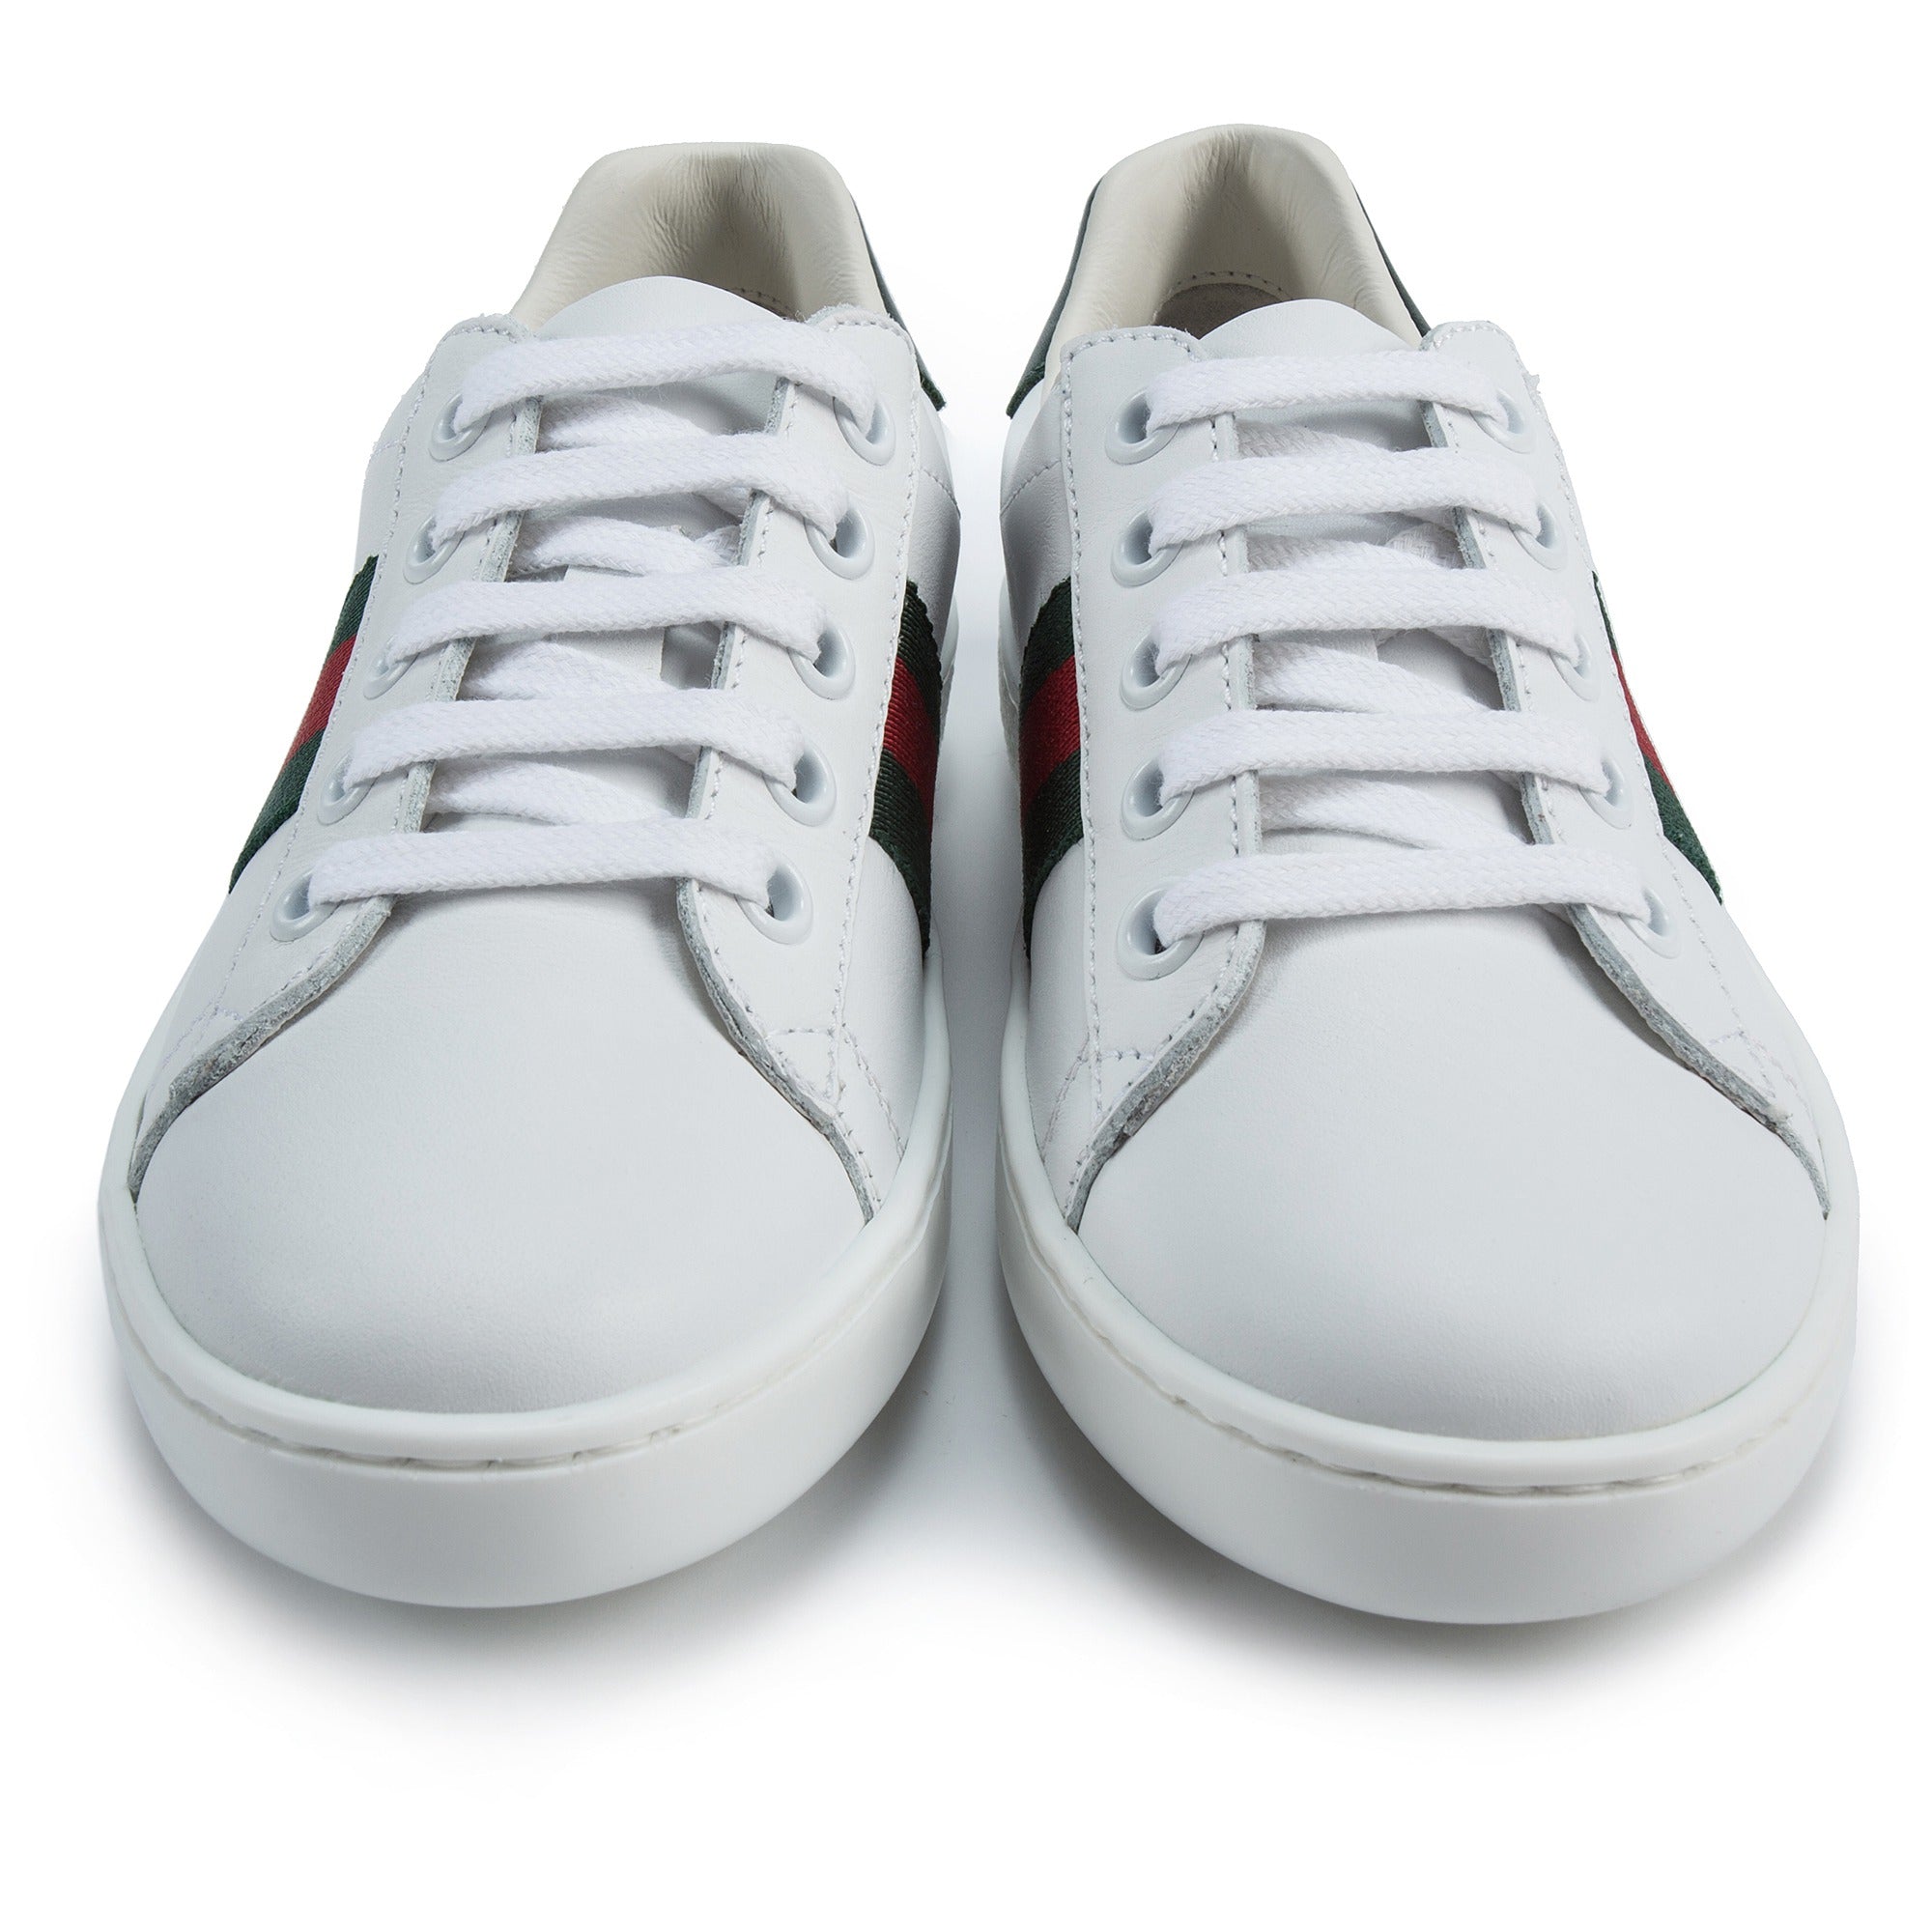 Girls & Boys White Leather Shoes